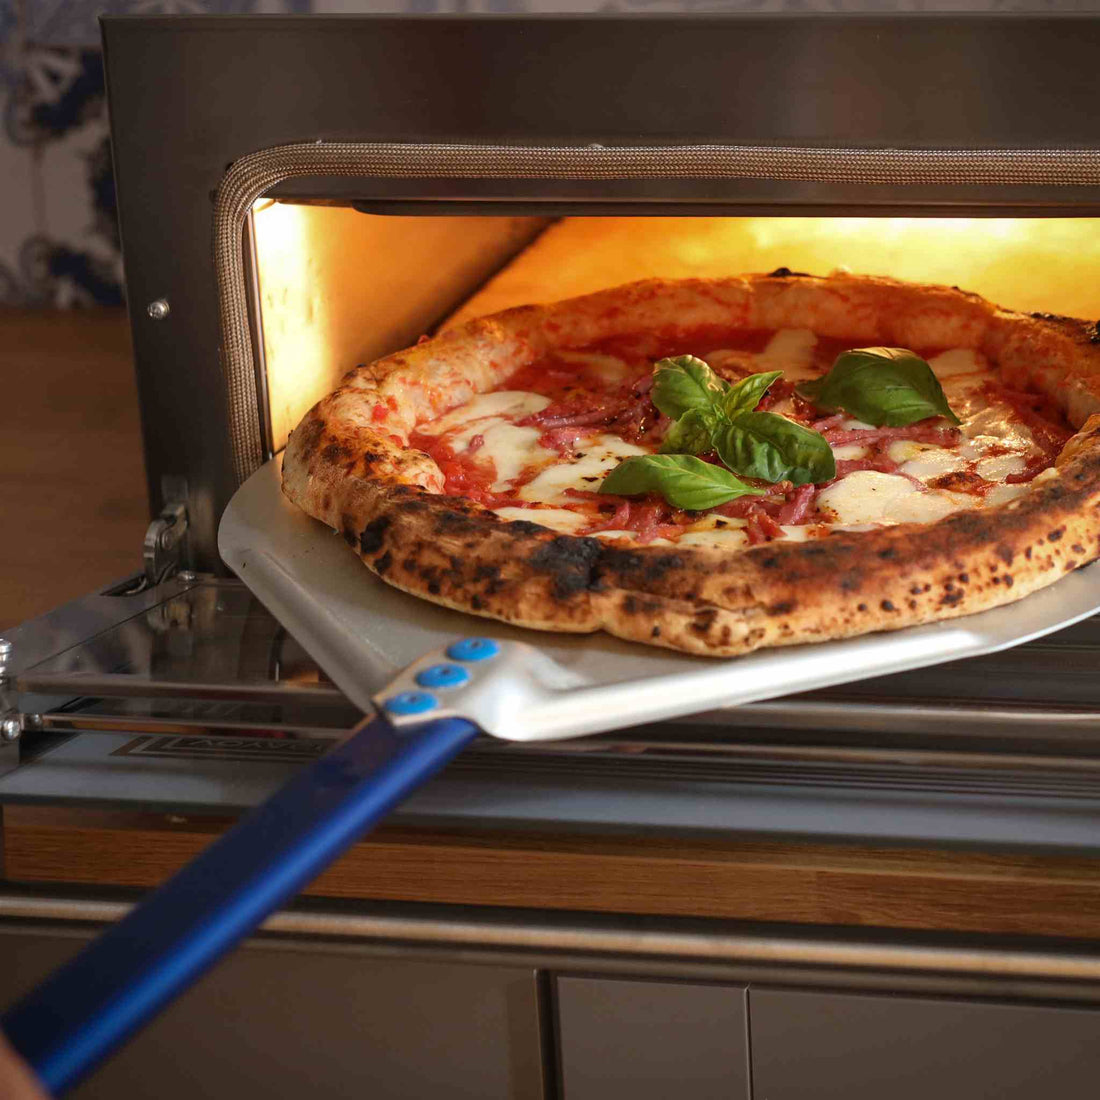 Macte Ovens Voyager TWIN | Electric oven for pizza and bread